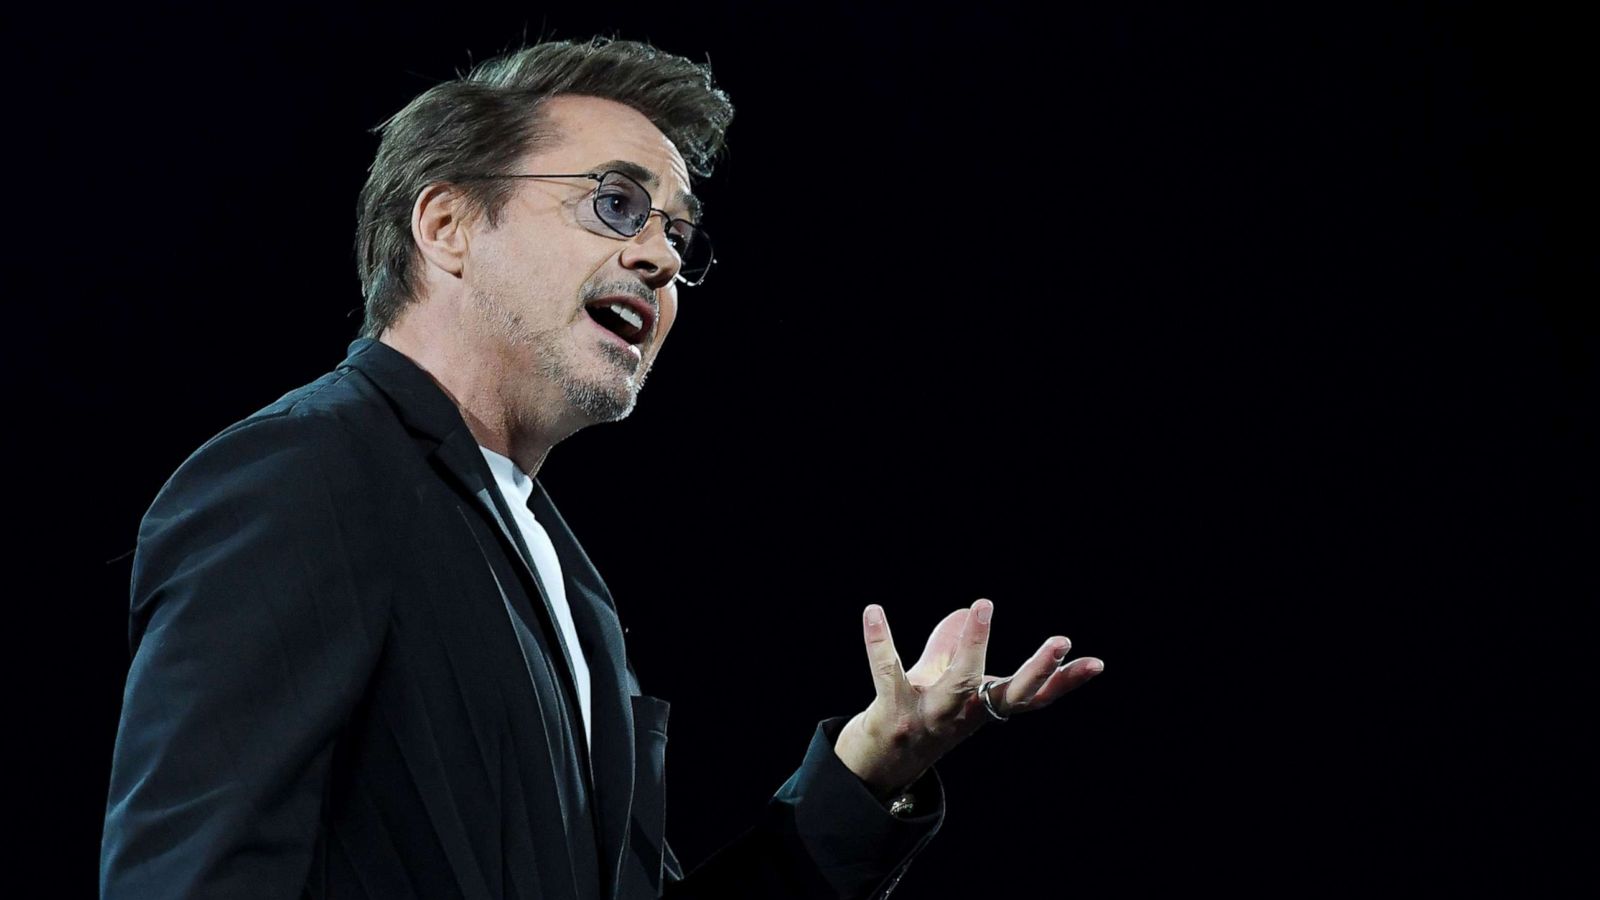 Real life Iron Man: Robert Downey Jr. launches climate change